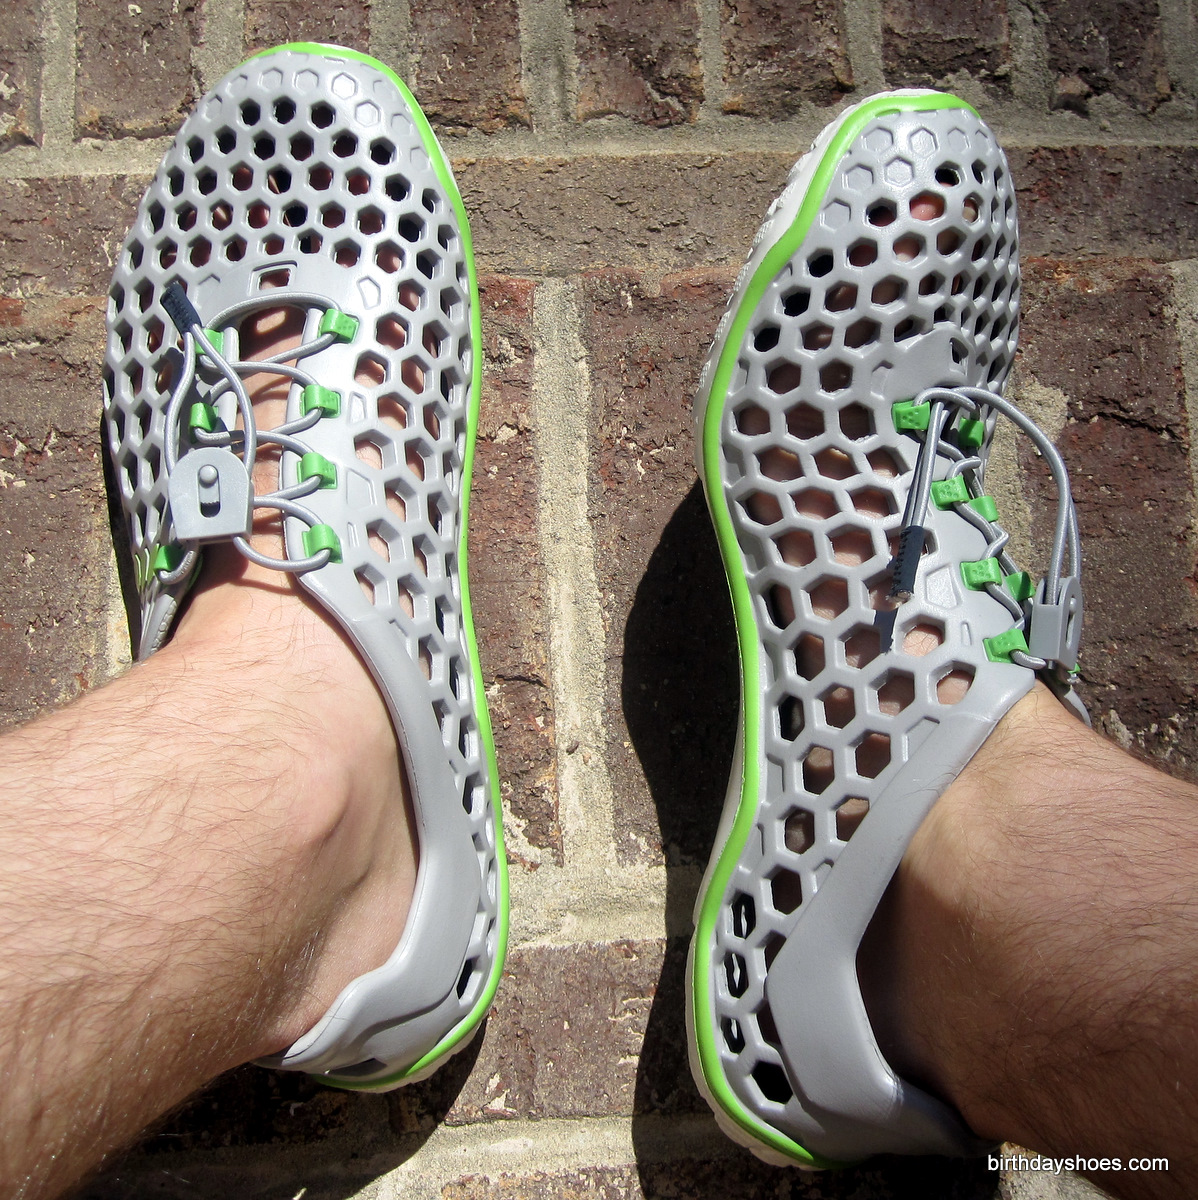 Vivo Barefoot Ultra Review - Birthday Shoes - Toe Shoes, Barefoot or ...